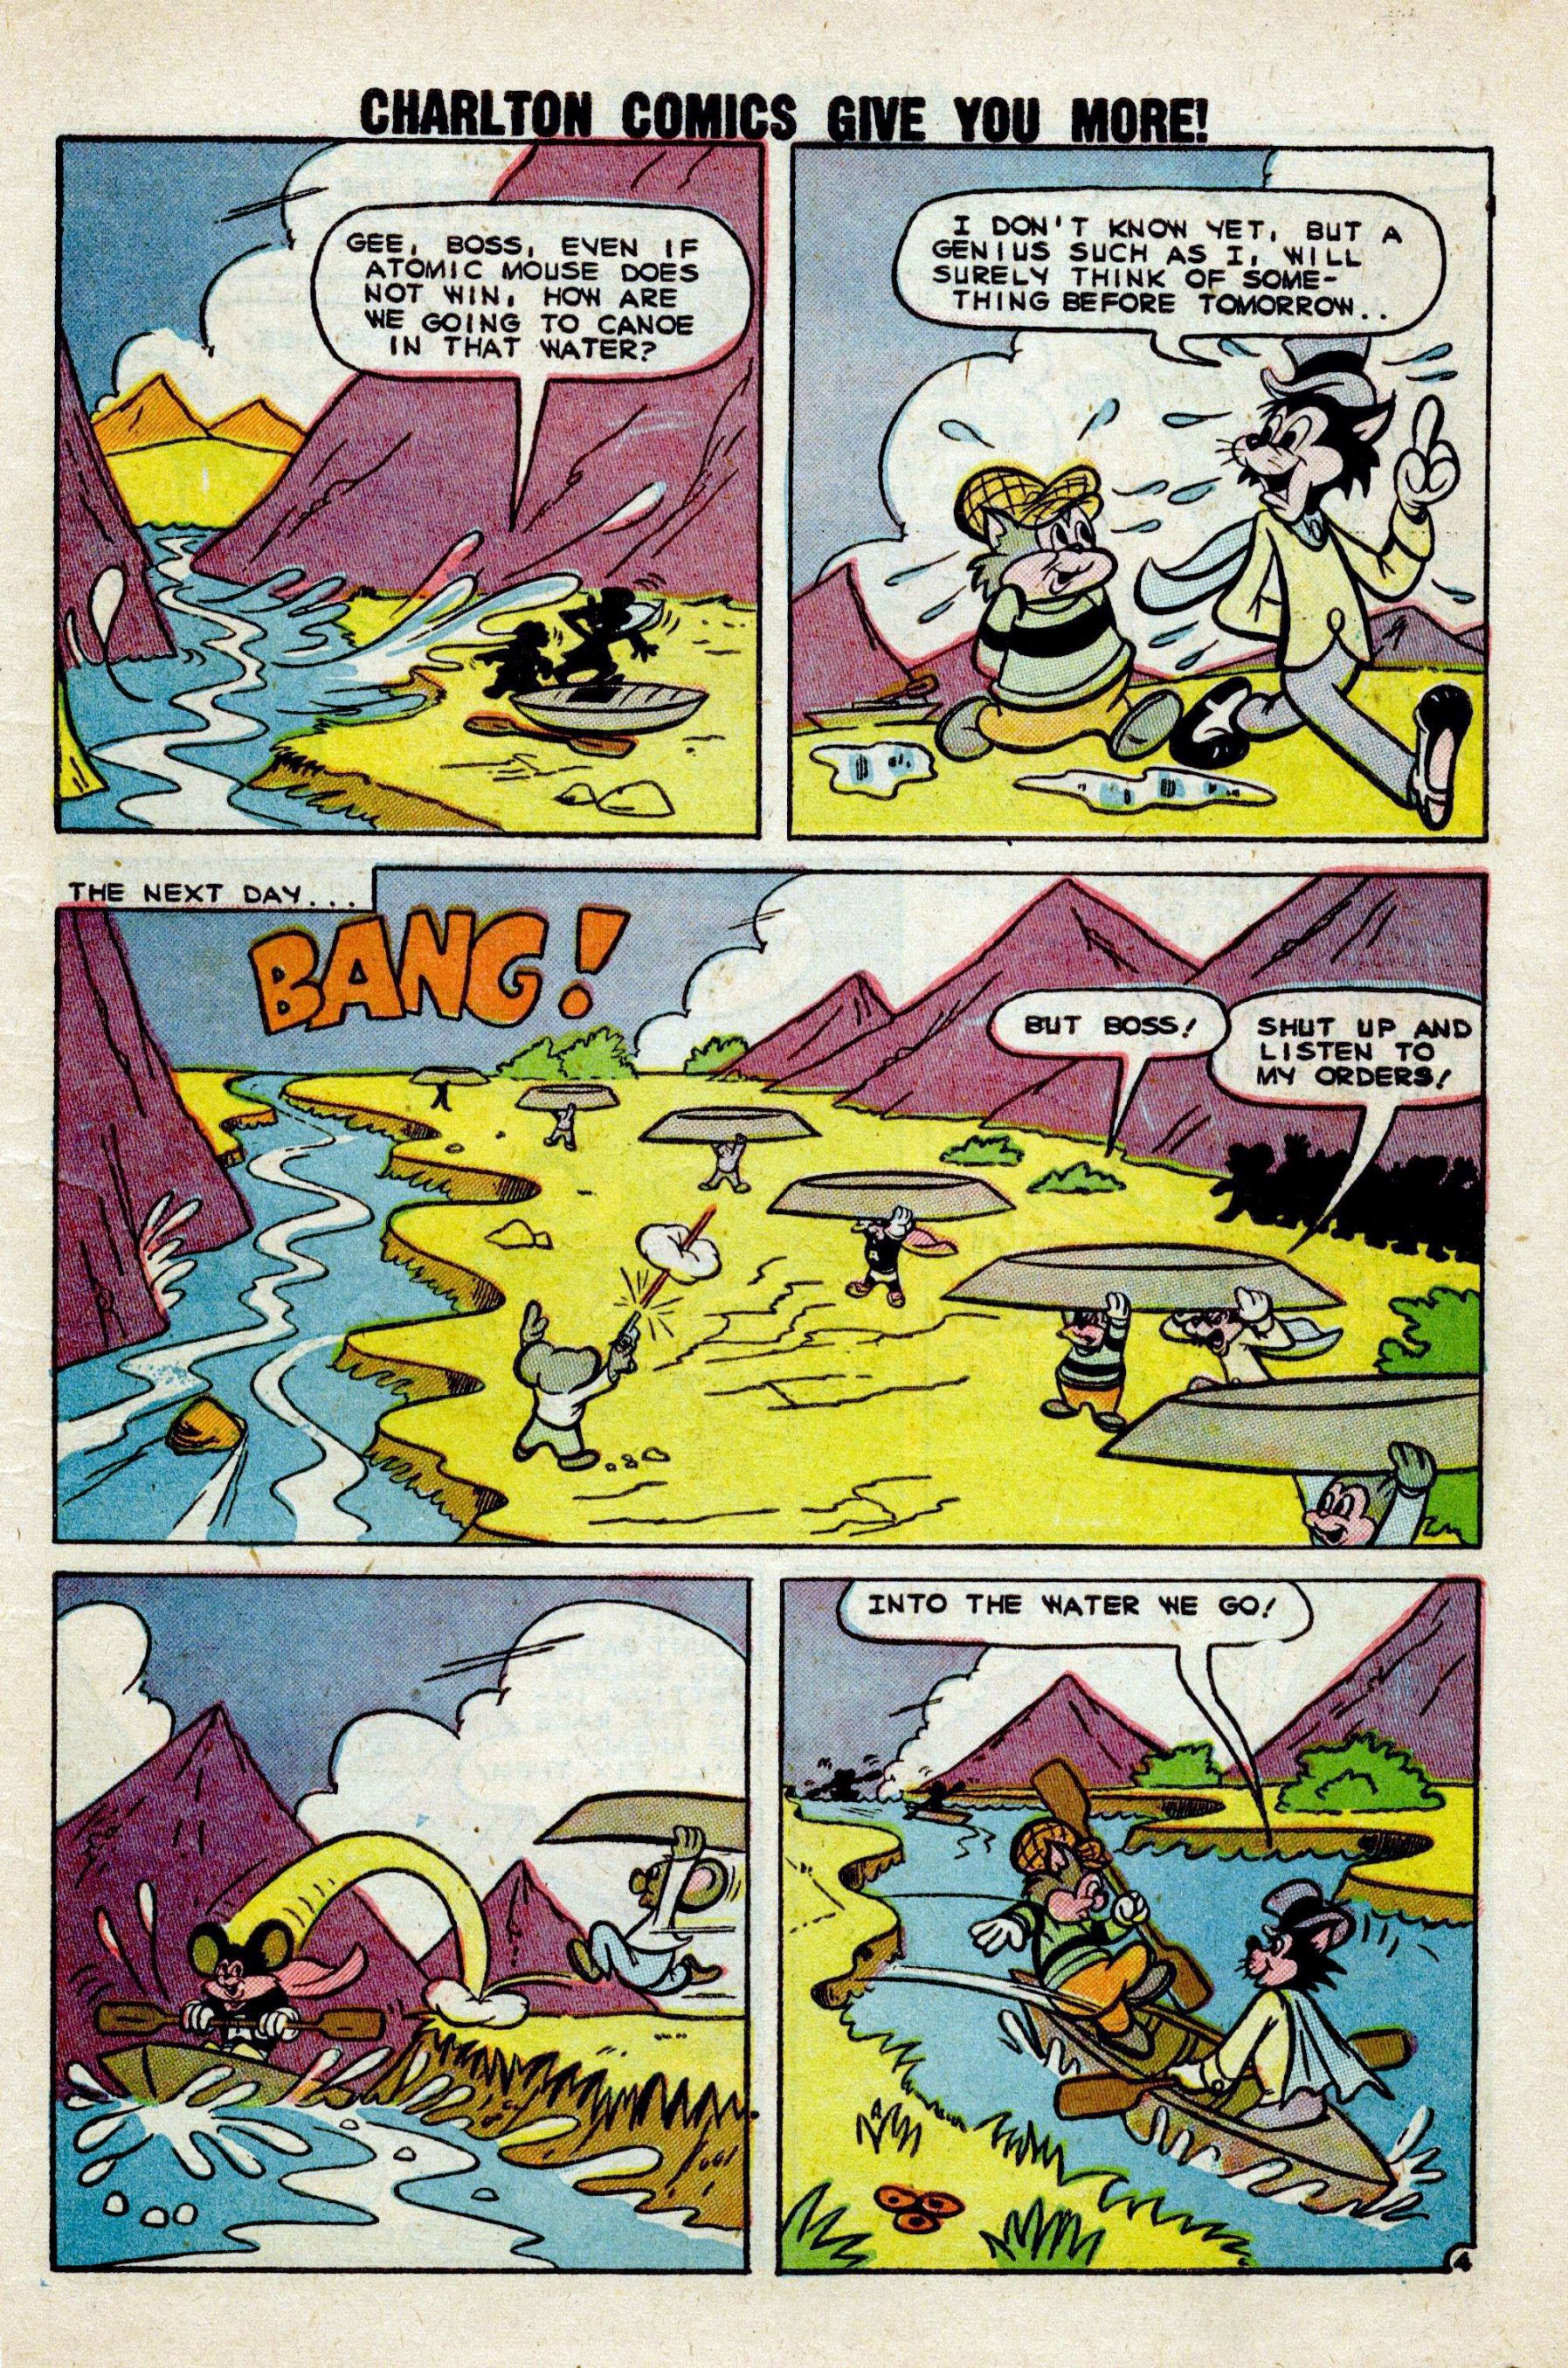 Read online Atomic Mouse comic -  Issue #34 - 7